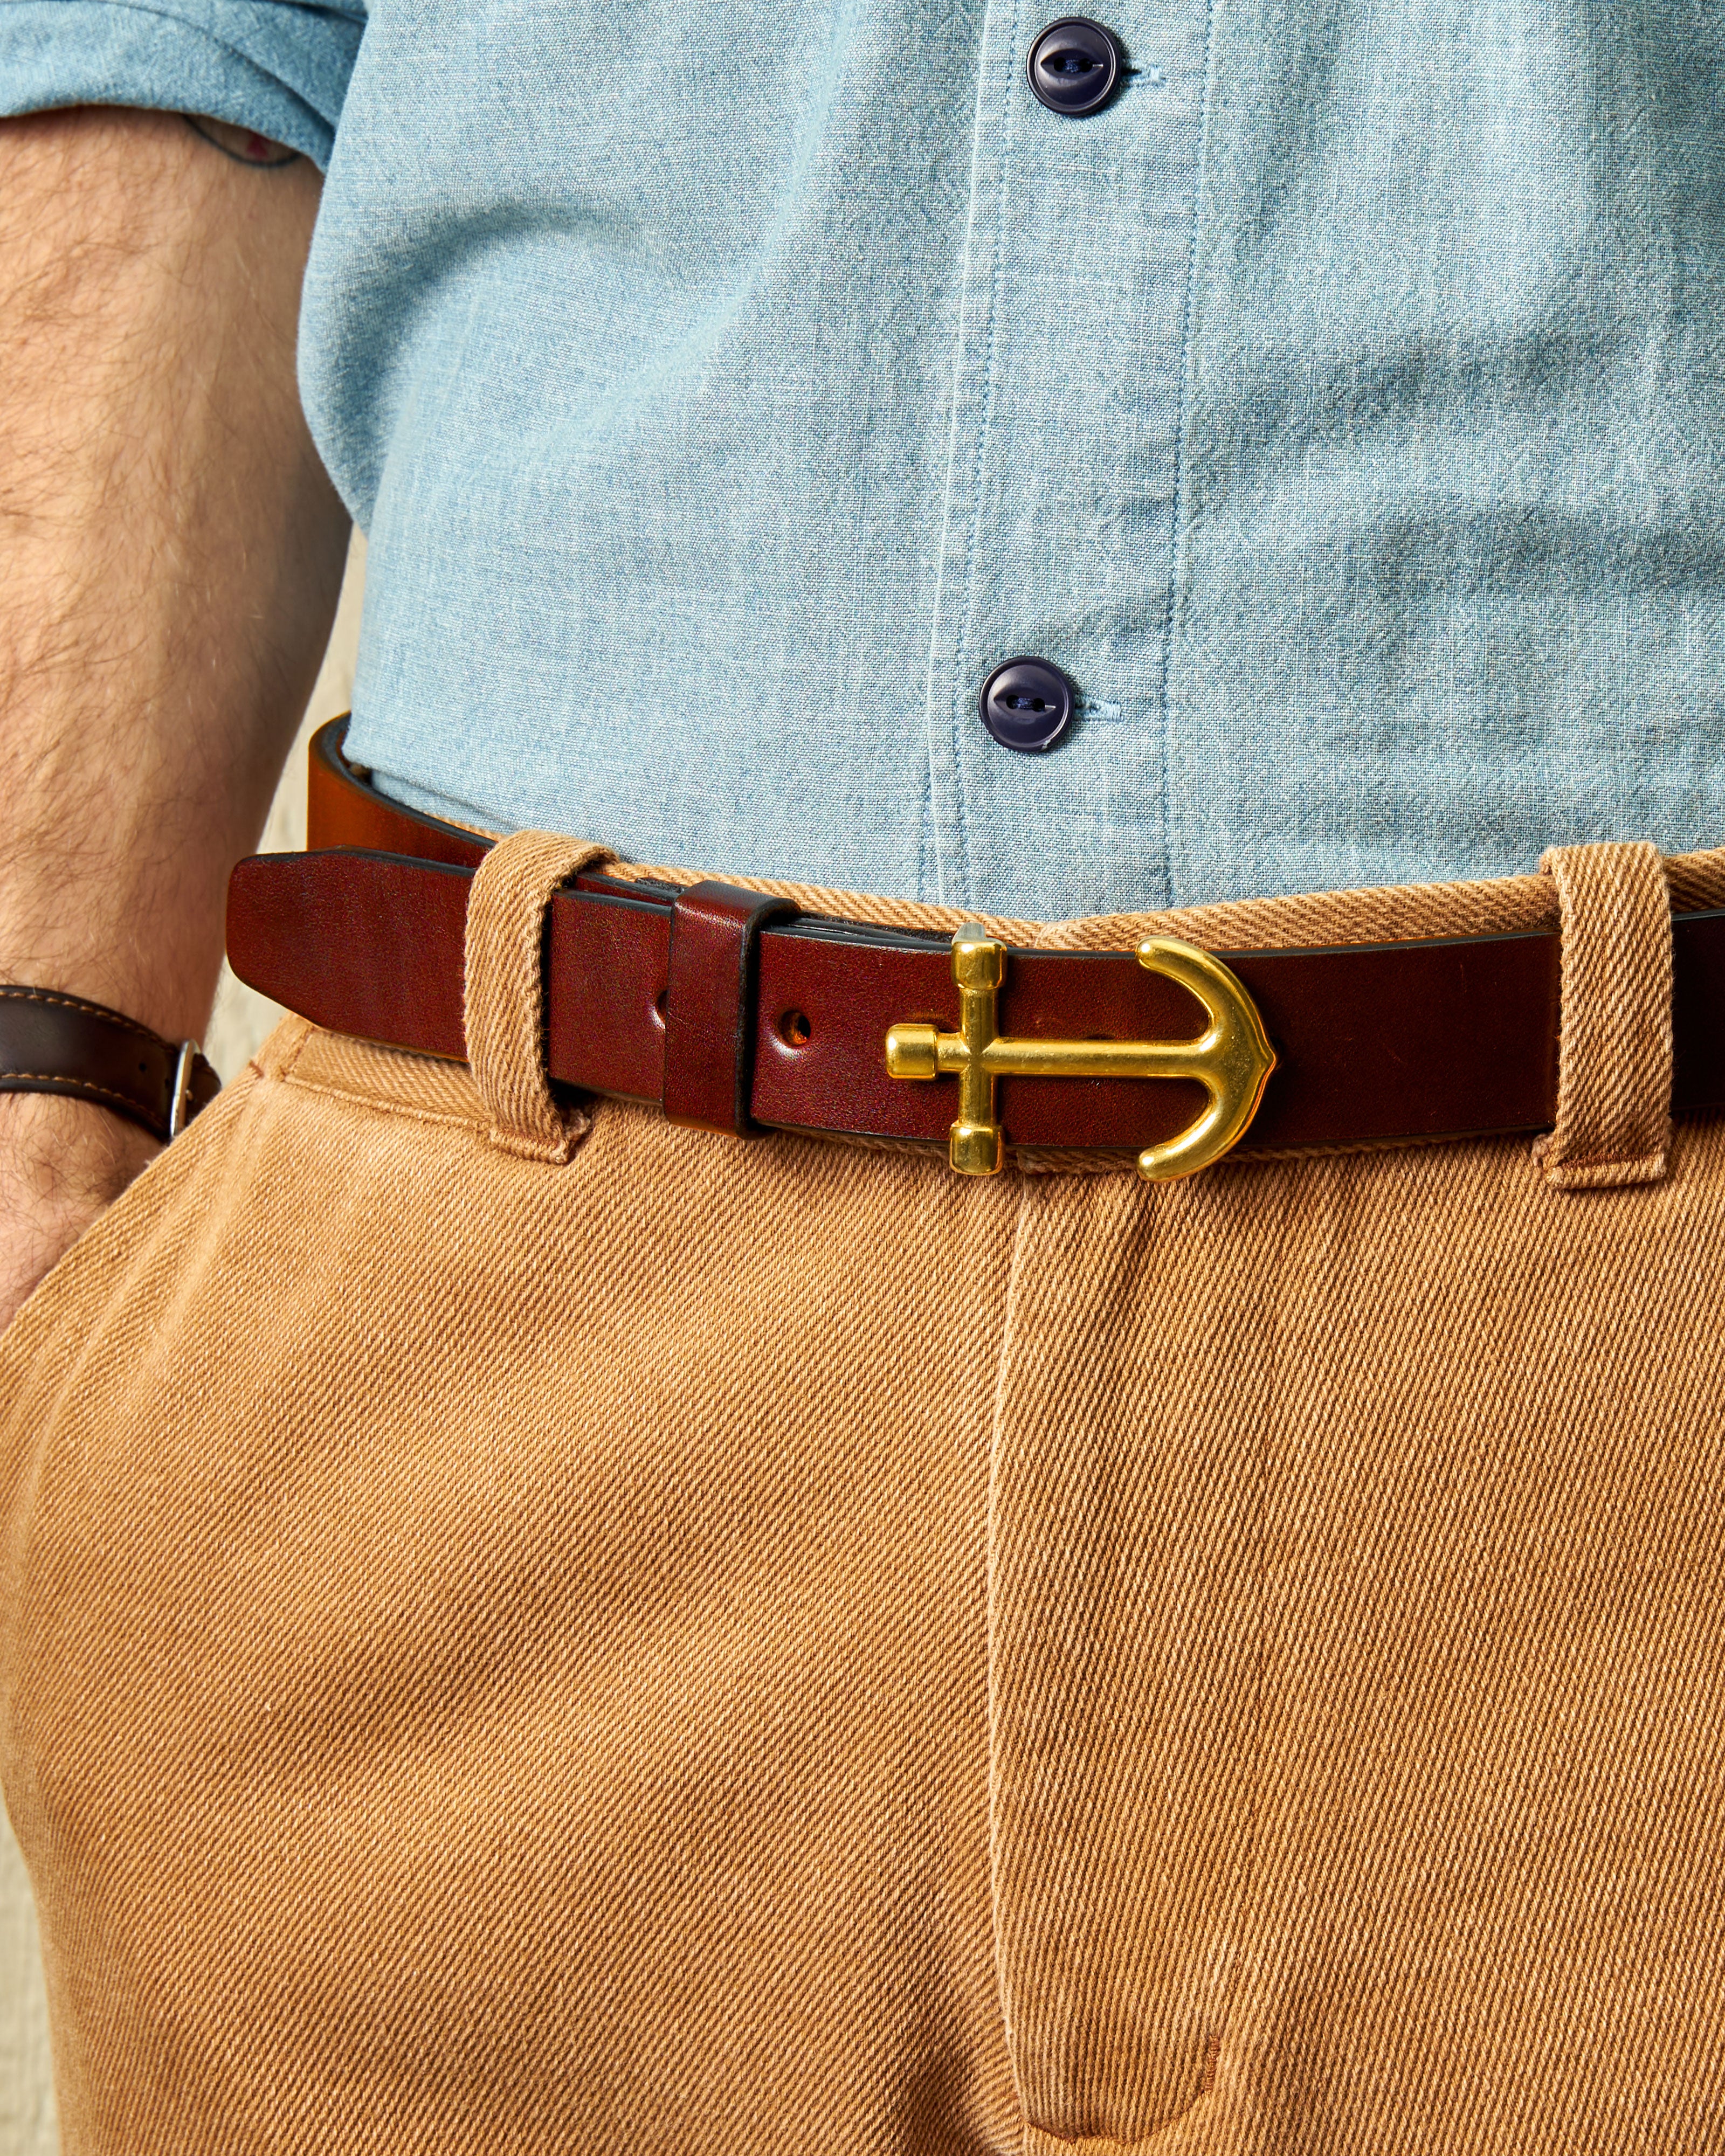 Bridle Strap Belt with Anchor Buckle in Oak Bark – Quaker Marine Supply Co.